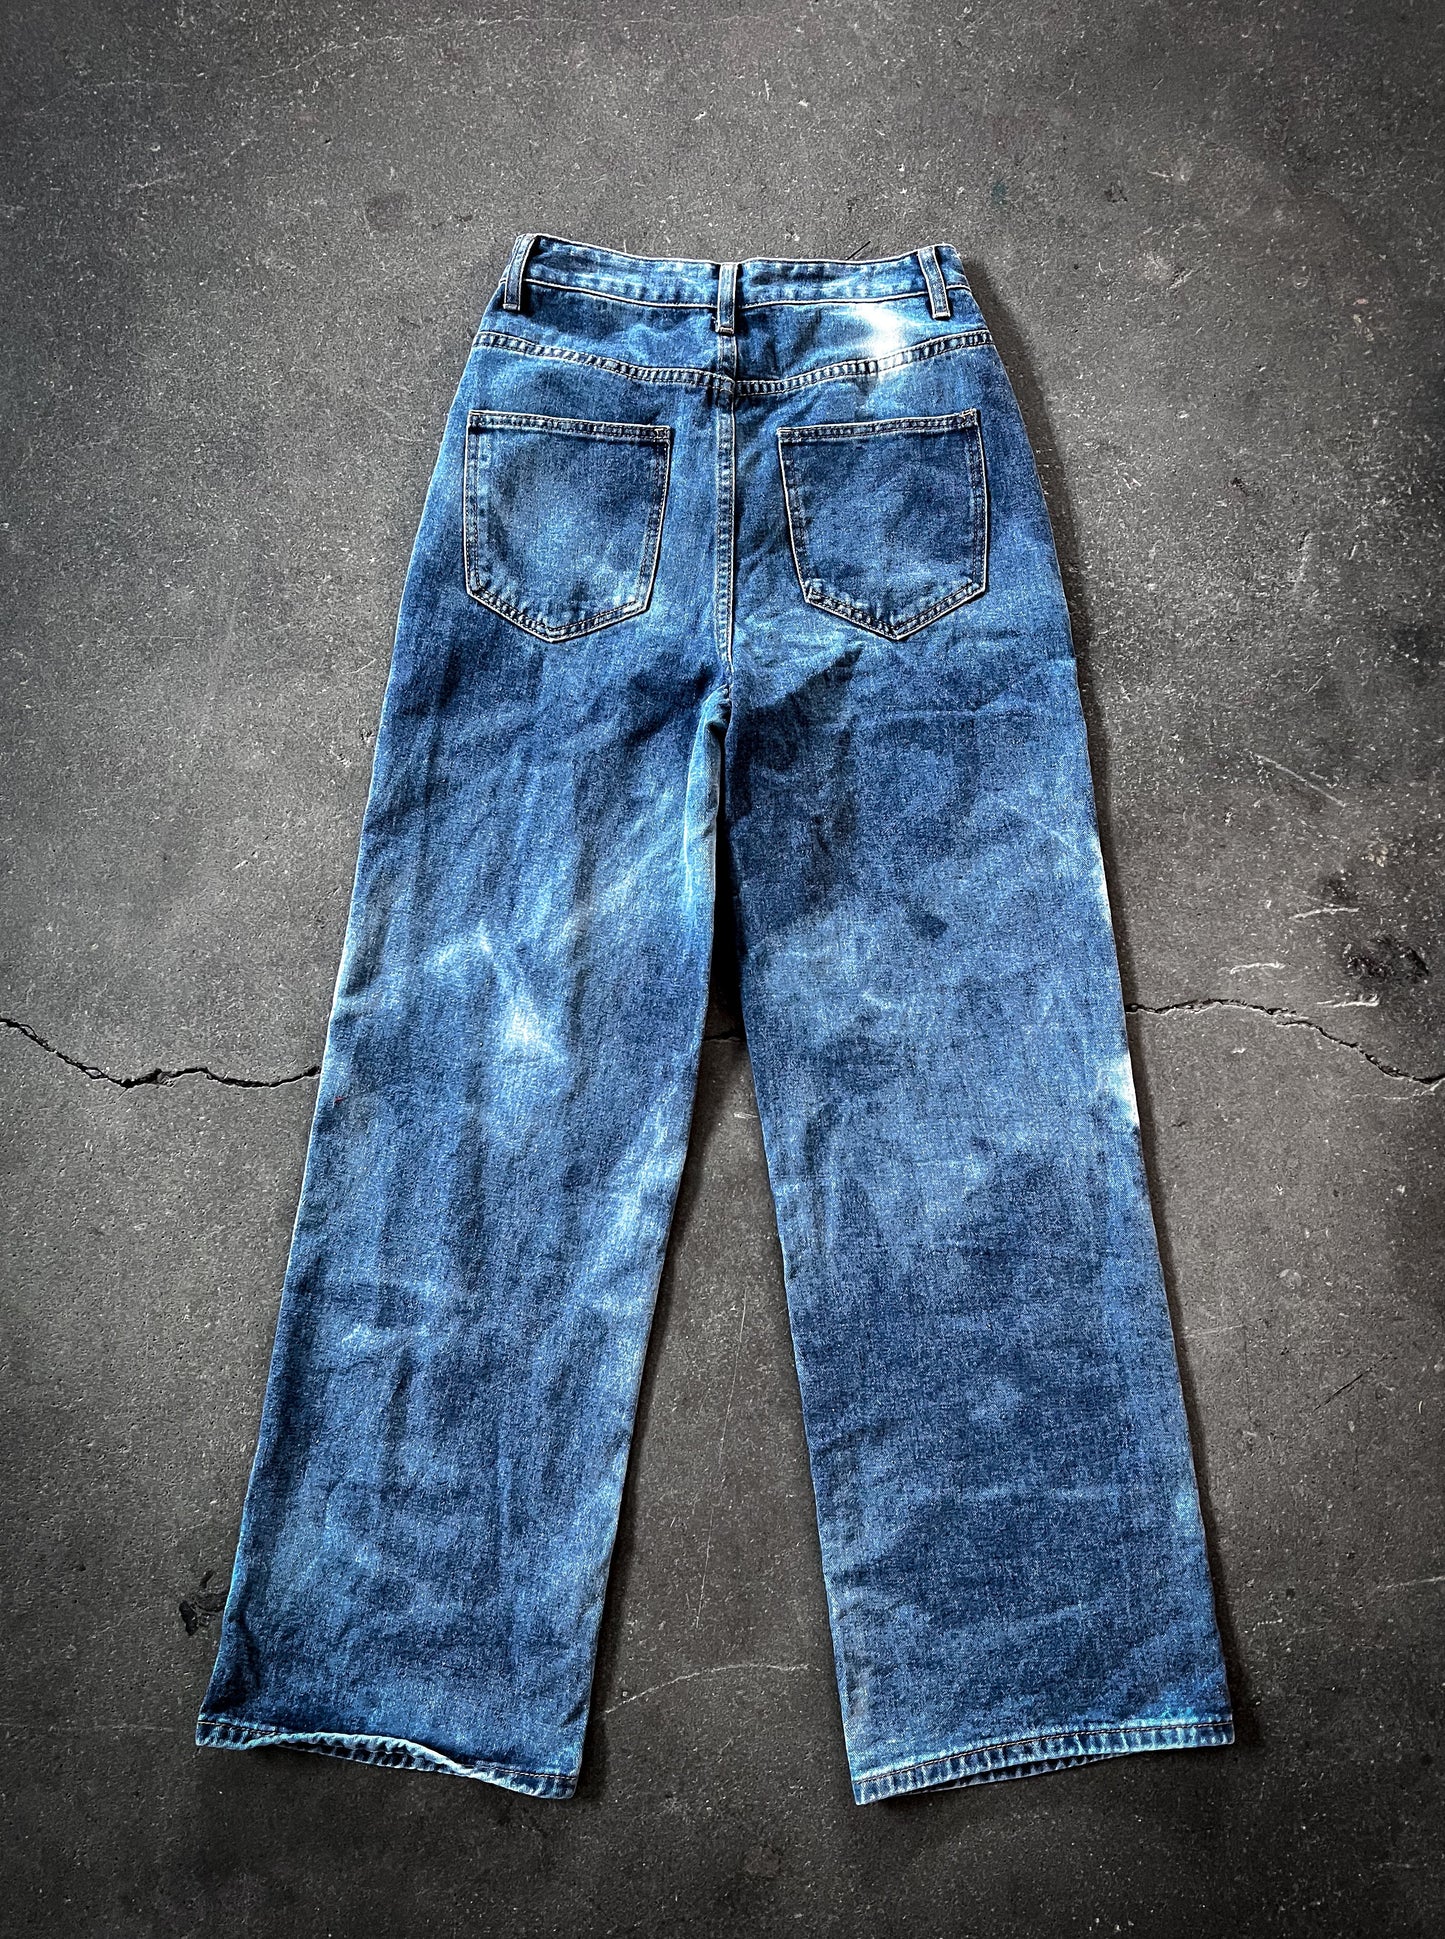 Water Bleached Jeans (#9)